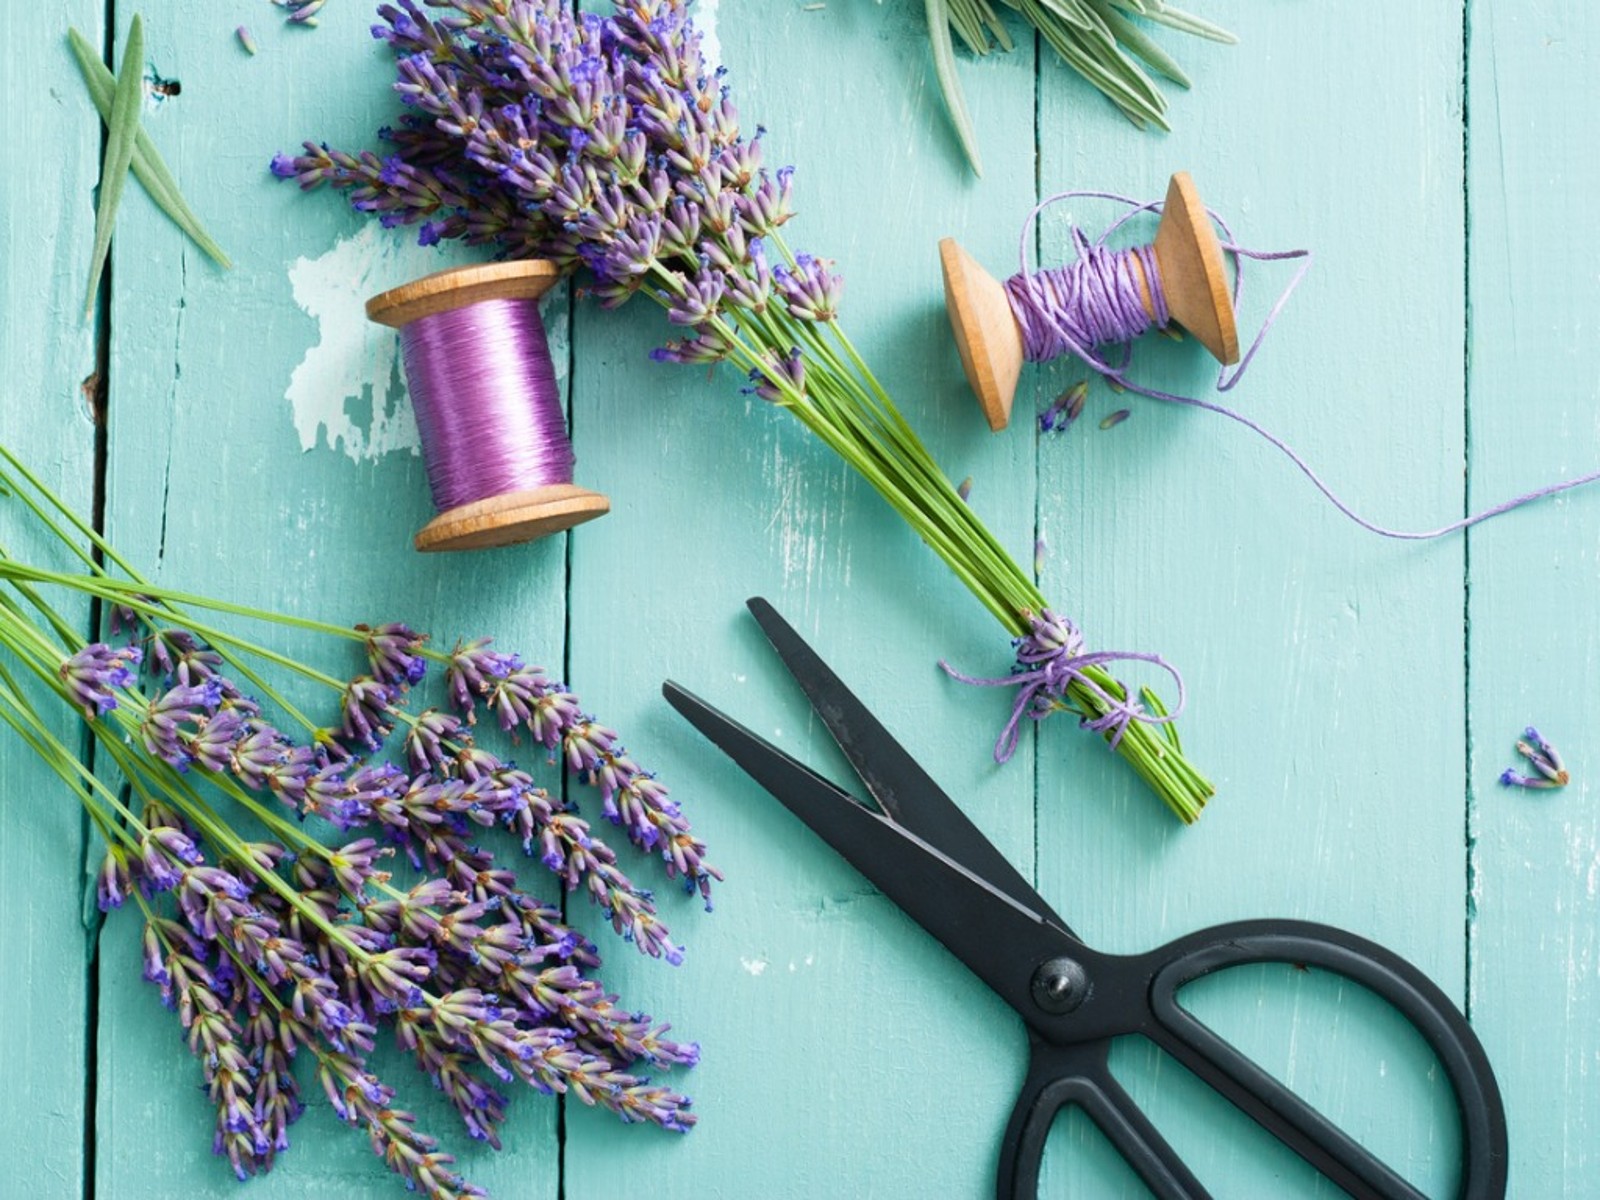 Handicrafts with lavender - 7 simple DIY ideas for floral decoration